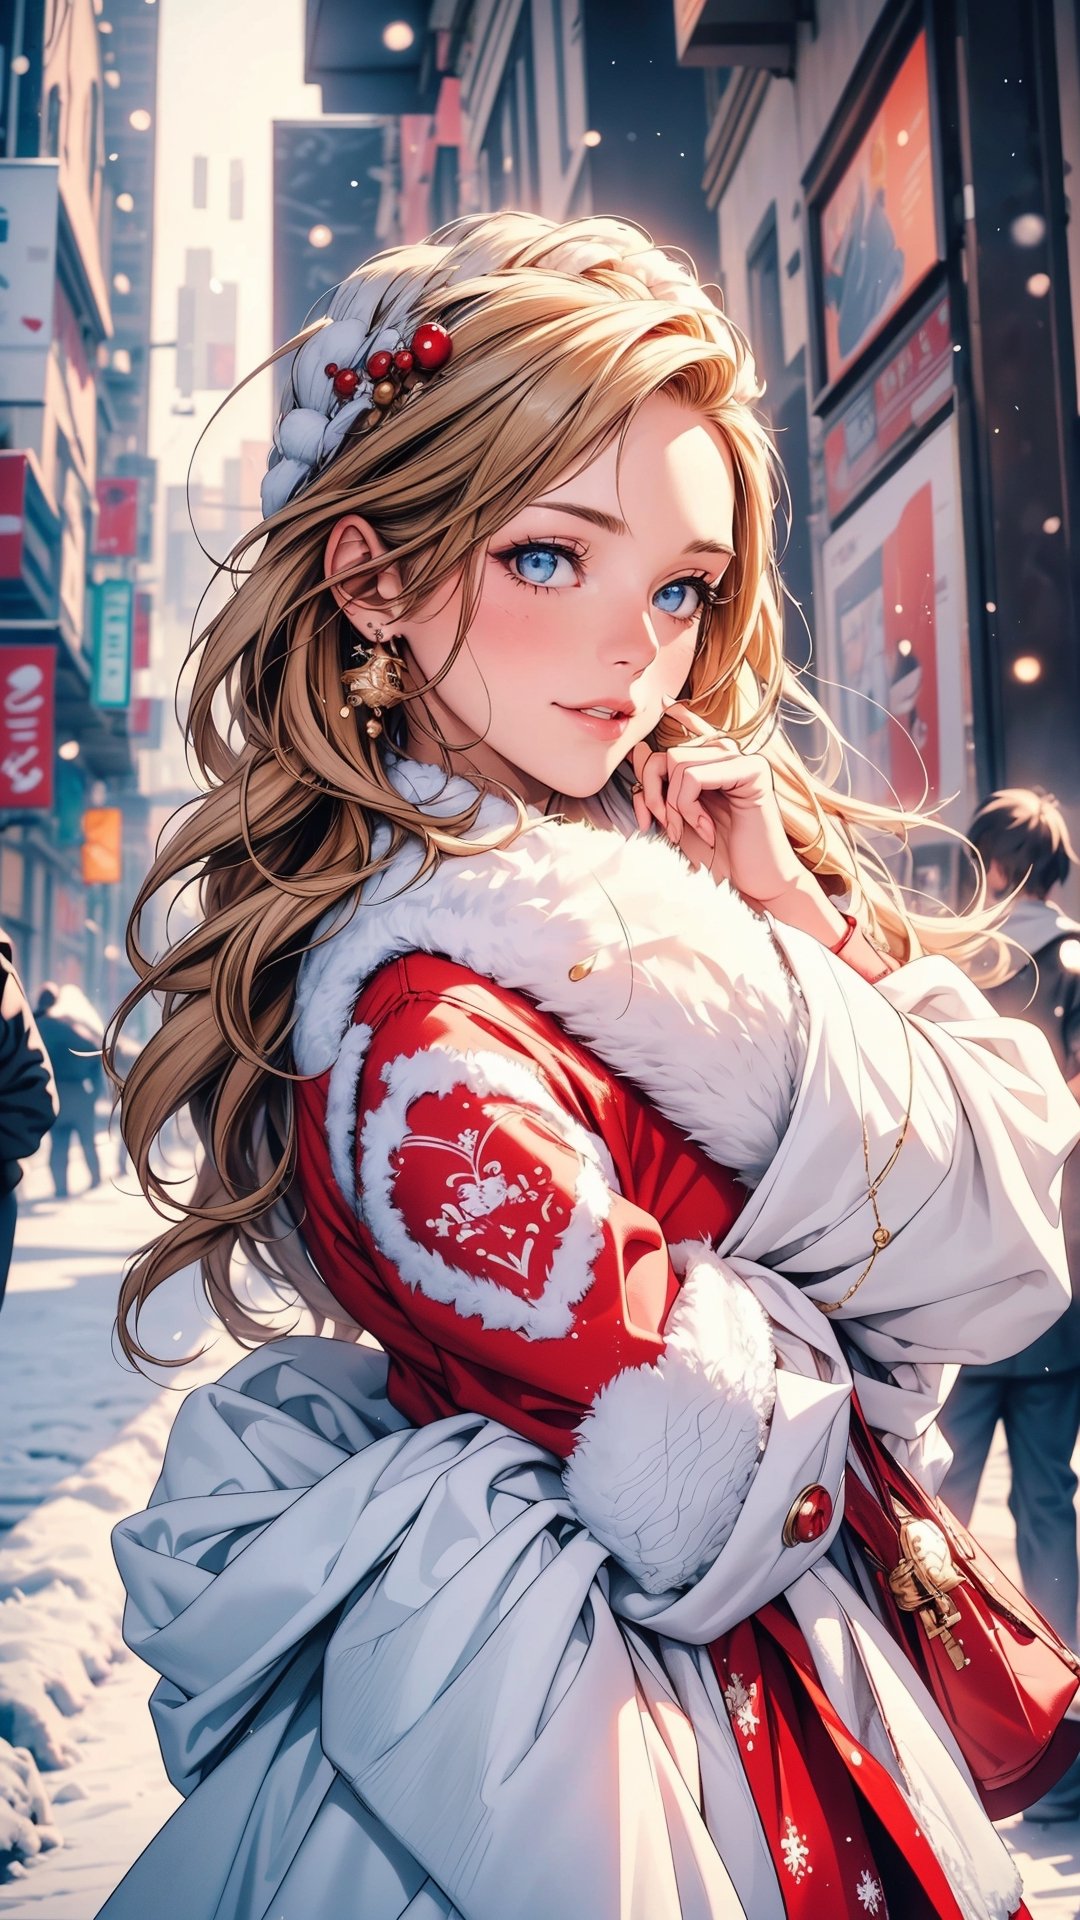 "Cute girl Santa Claus, (accurate anatomy body and hands: 1.2), beautiful face, detailed face, red shoes, illustration, super detailed, high quality (best quality, 4K, 8K, high resolution, Masterpiece: 1.2), Photography of people, Bright colors, Warm tones, Realism (Photorealistic: 1.37), Festival atmosphere, Jingle bells, Snow, Cozy winter scene, Joyful expression, Playful Attitude, winter wonderland, soft lighting, dreamy atmosphere"